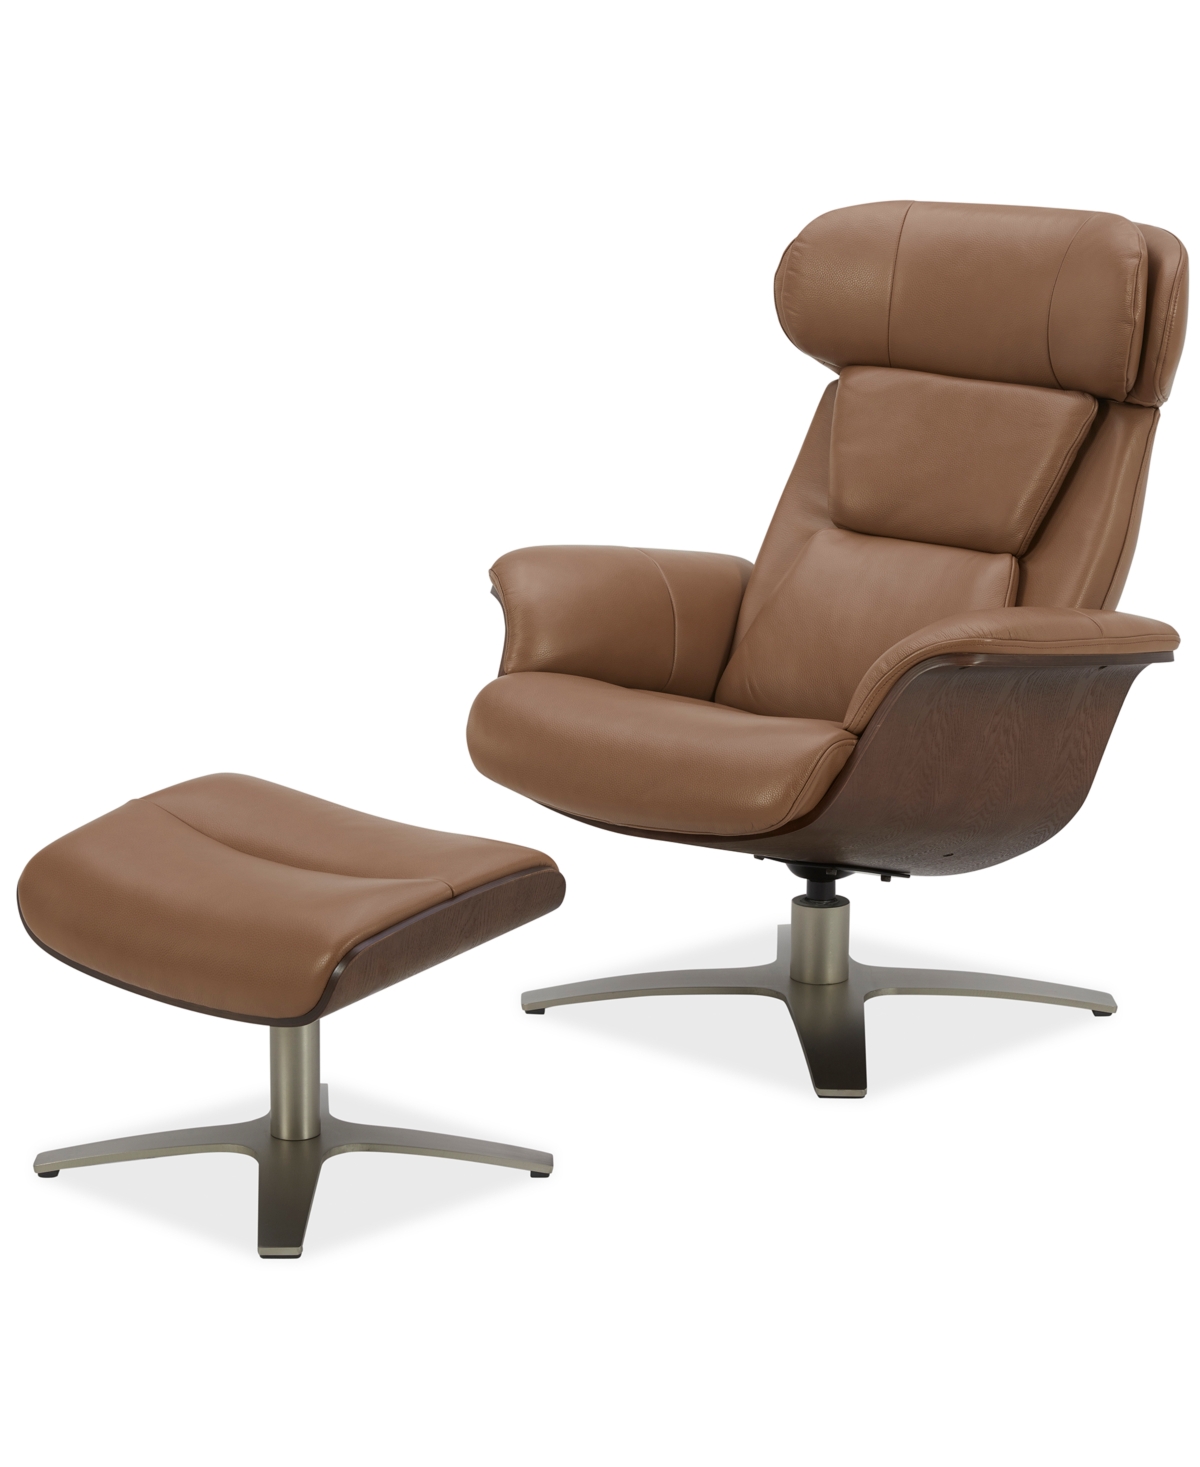 Furniture Janer Leather Swivel Chair & Ottoman Set, Created For Macy's In Butternut